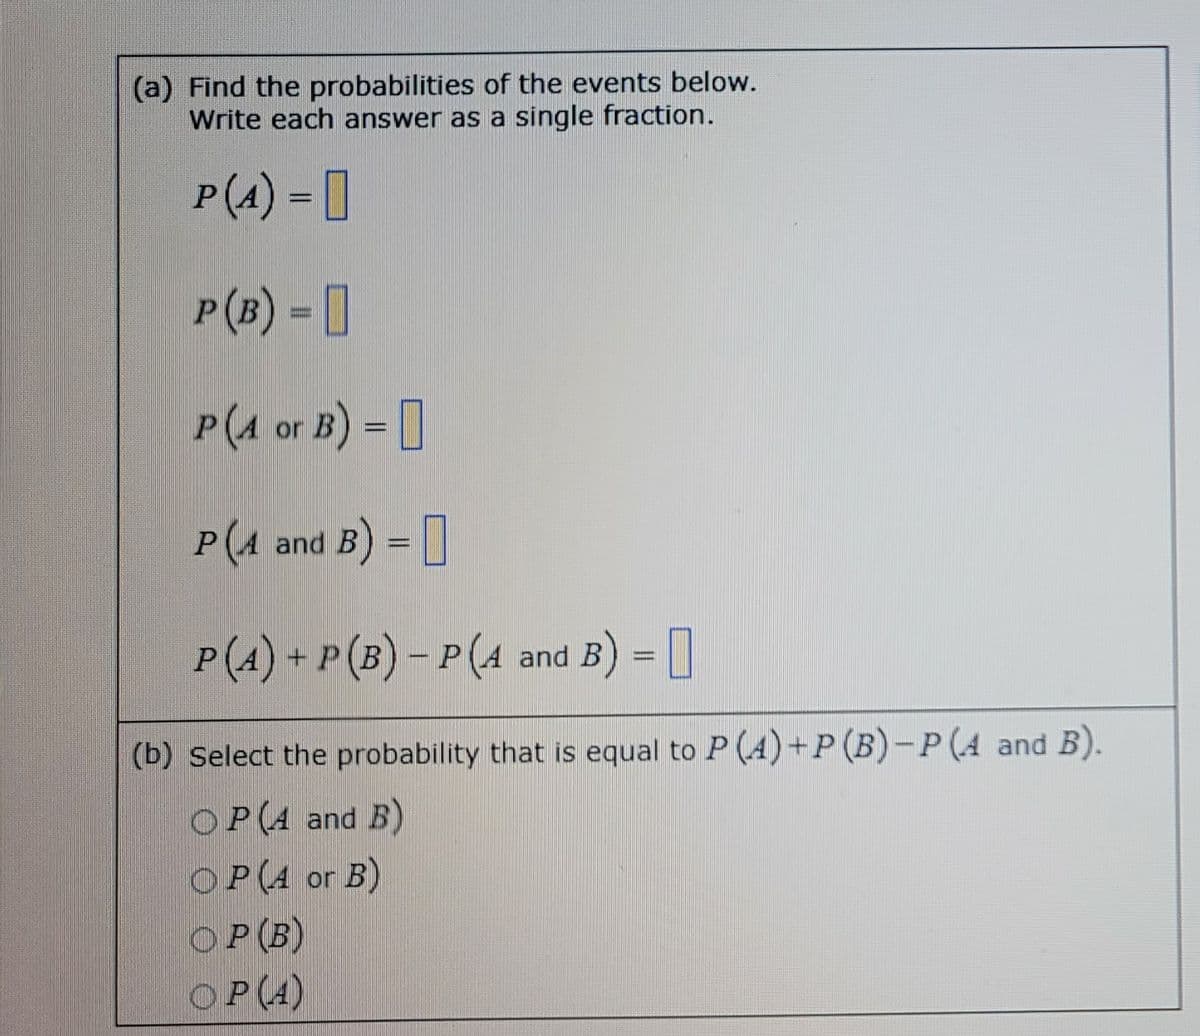 (a) Find the probabilities of the events below.
Write each answer as a single fraction.
P(A) =
P (B) =
P(1 or B) =
P (4 and B) =
P (4) + P (B) − P (A and B) =
(b) Select the probability that is equal to P (4)+P (B)-P (A and B).
OP(A and B)
OP(A or B)
OP (B)
OP (4)